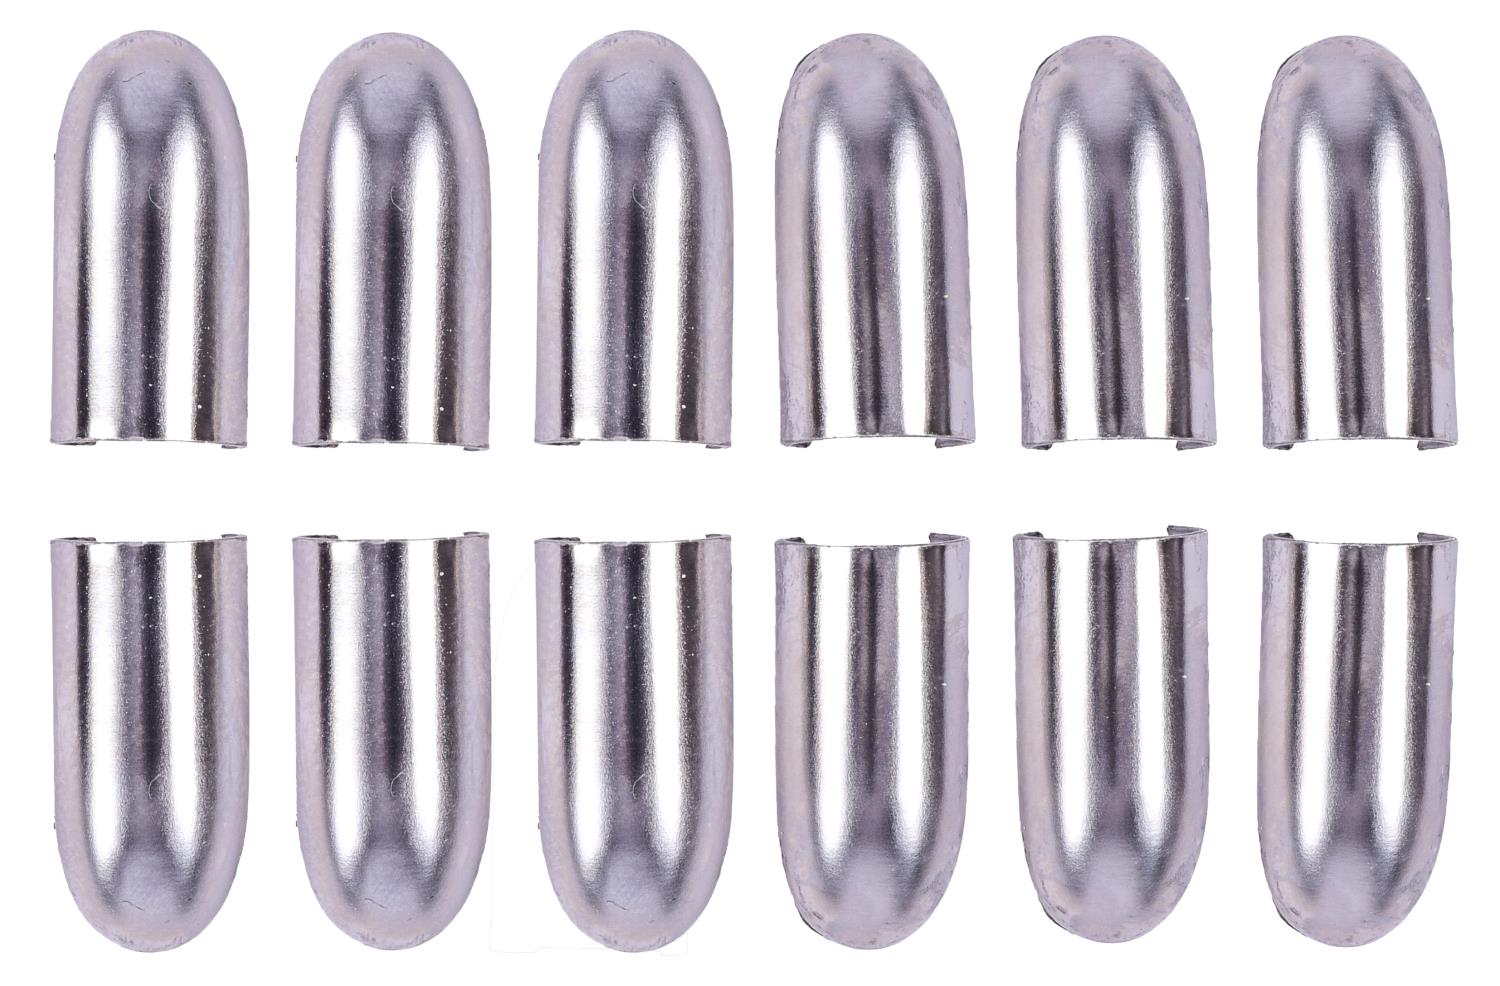 Seat Trim End Caps Fit Select 1966-1972 Buick, Cadillac, Chevy, Oldsmobile Pontiac Models [Chrome, Set of 12]